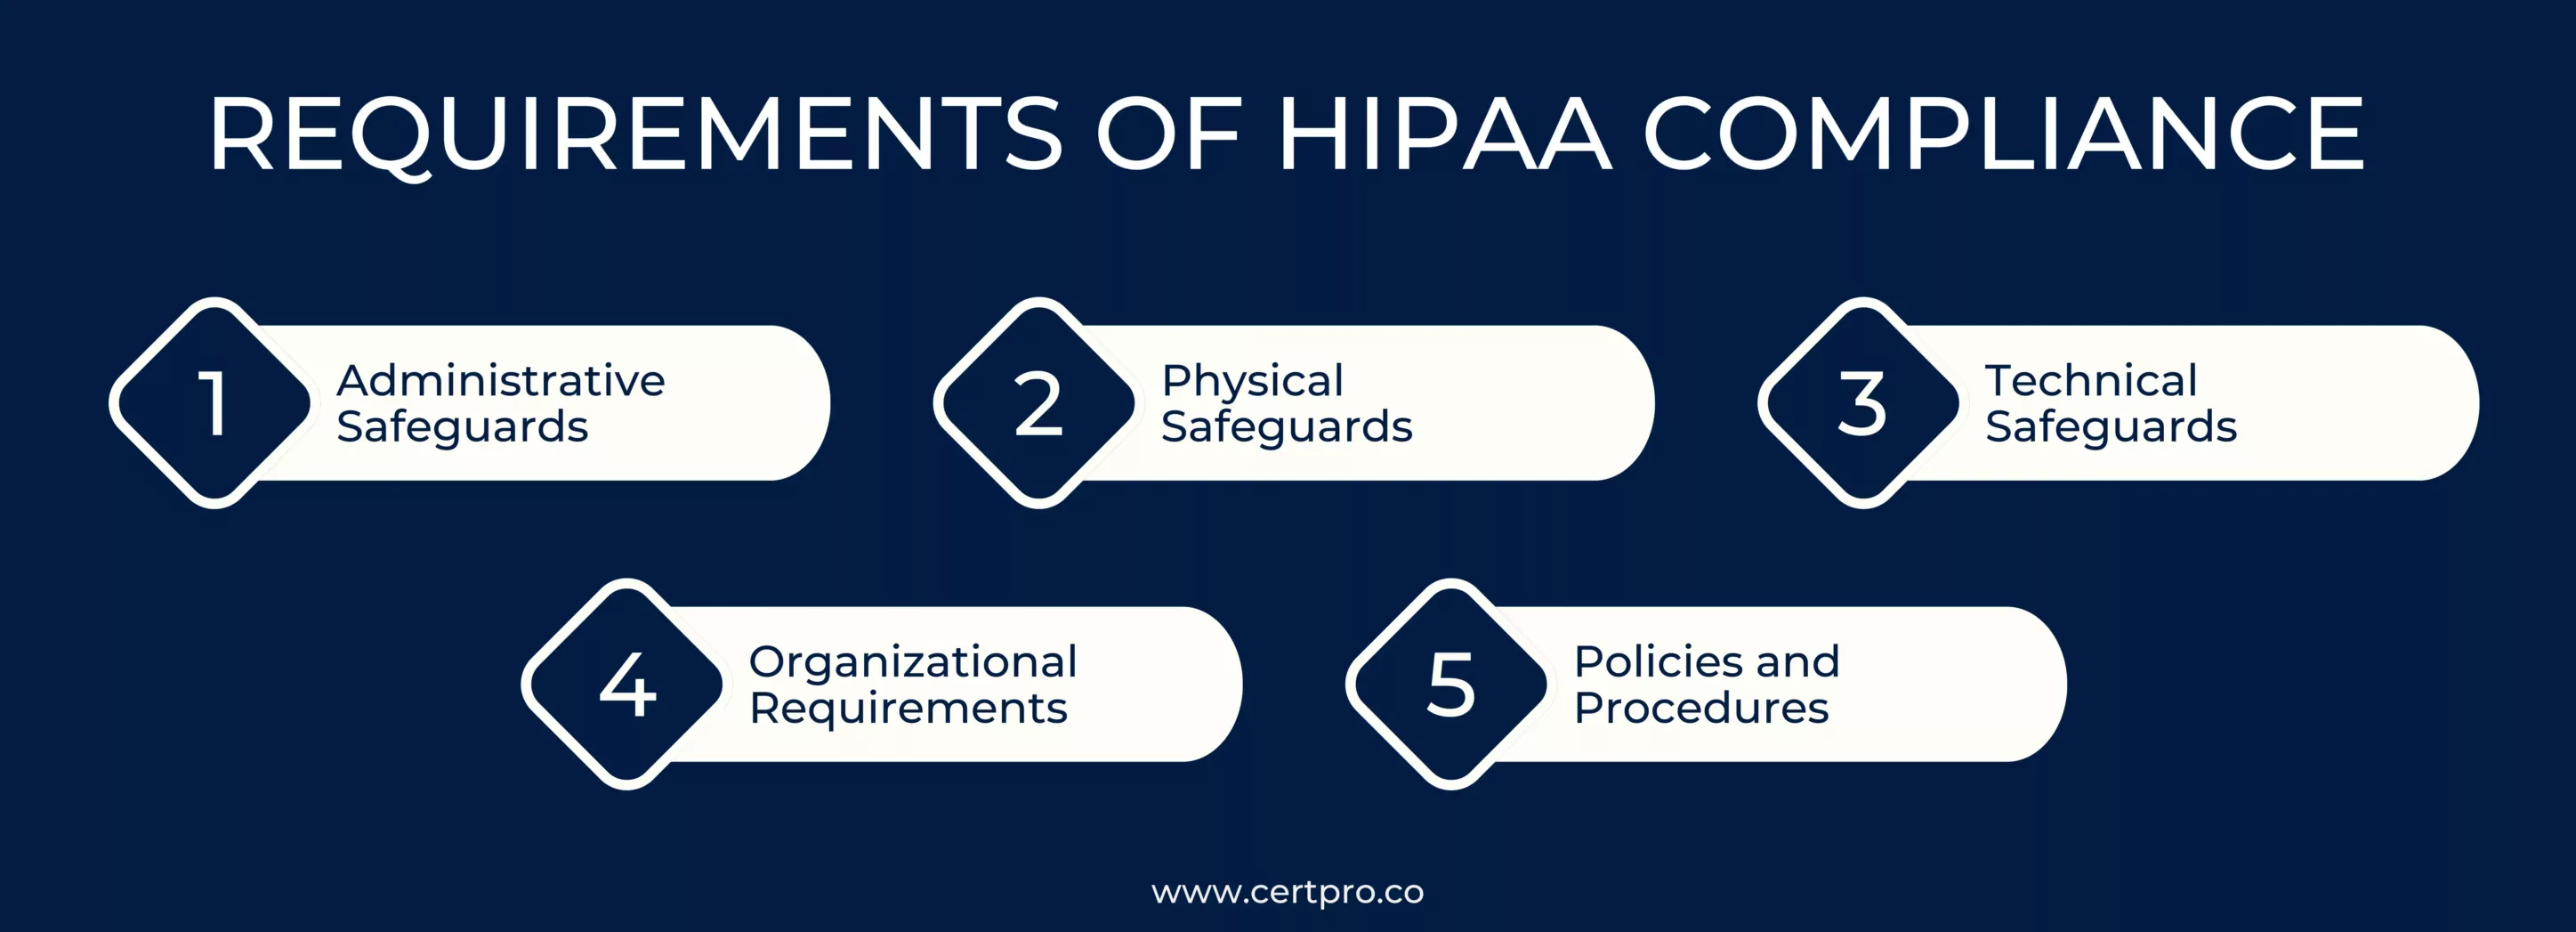 REQUIREMENTS OF HIPAA COMPLIANCE